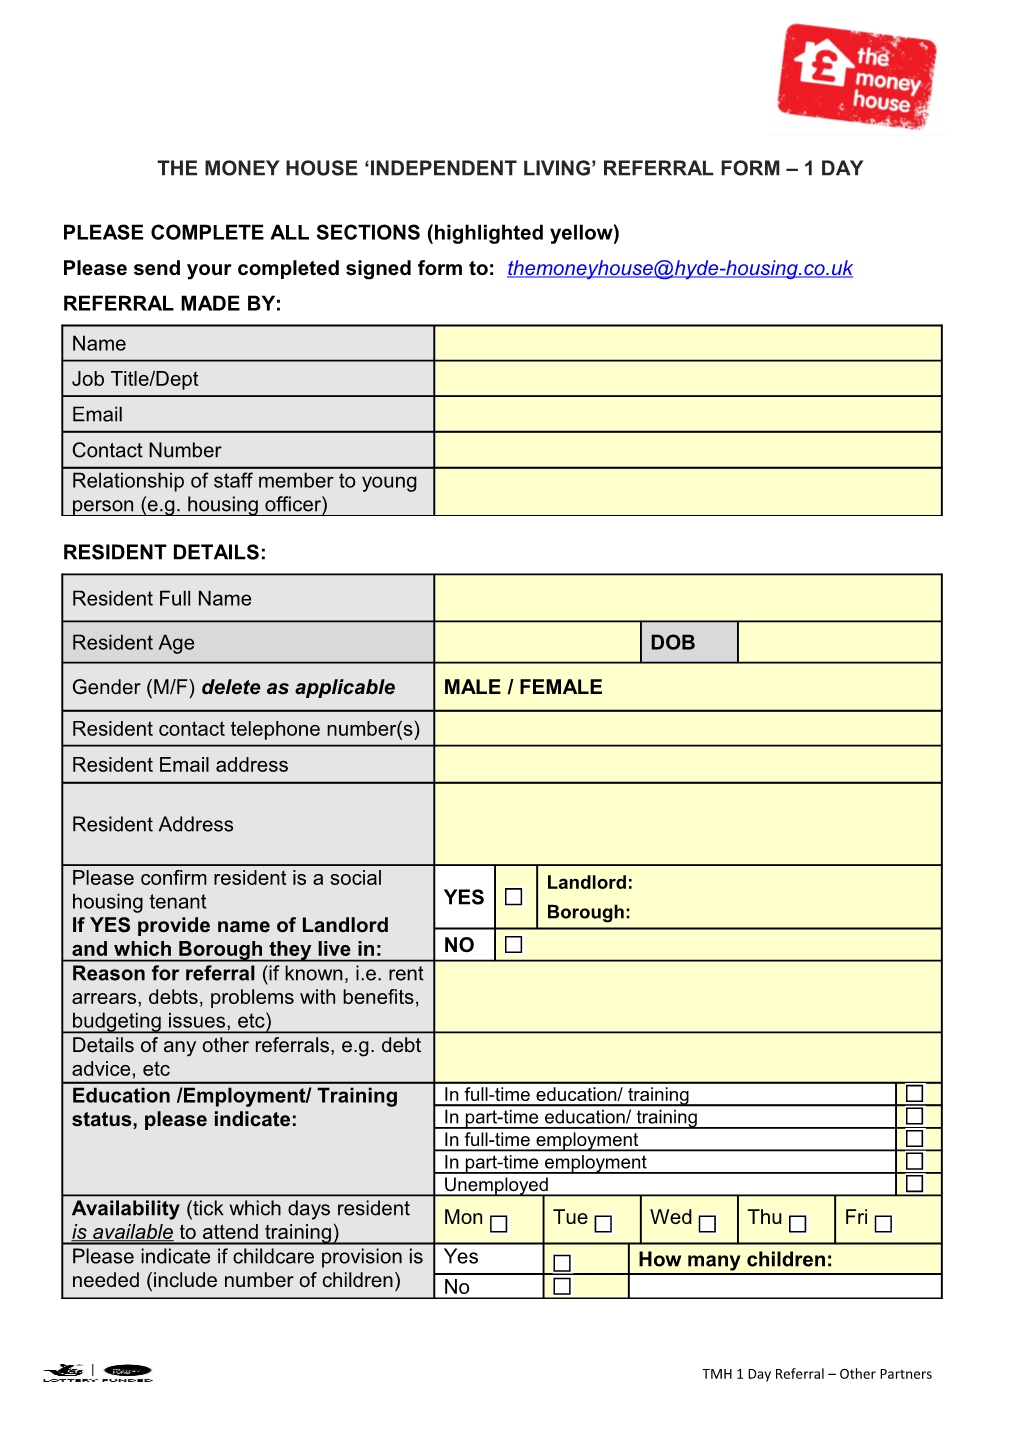 The Money House Independent Living Referral Form 1 Day